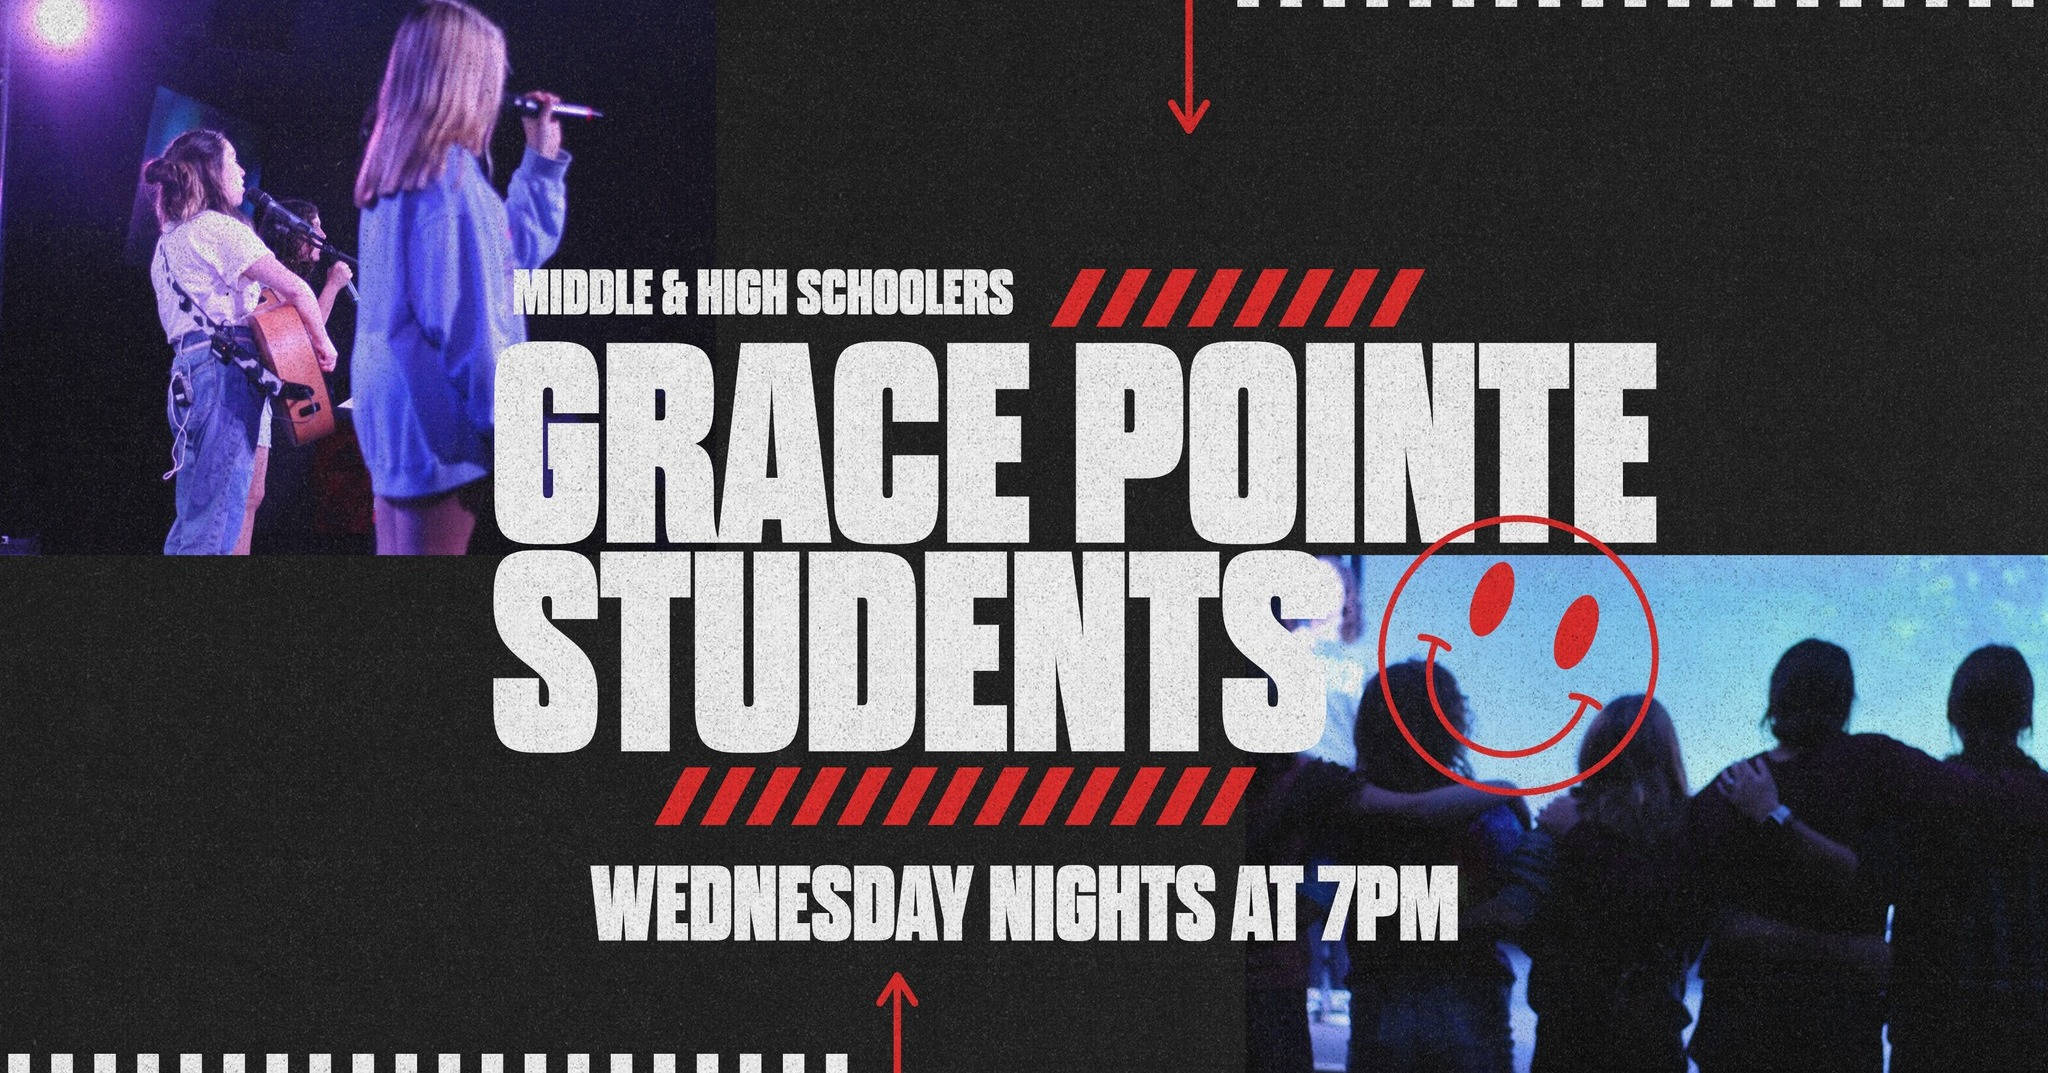 grace pointe church student ministry